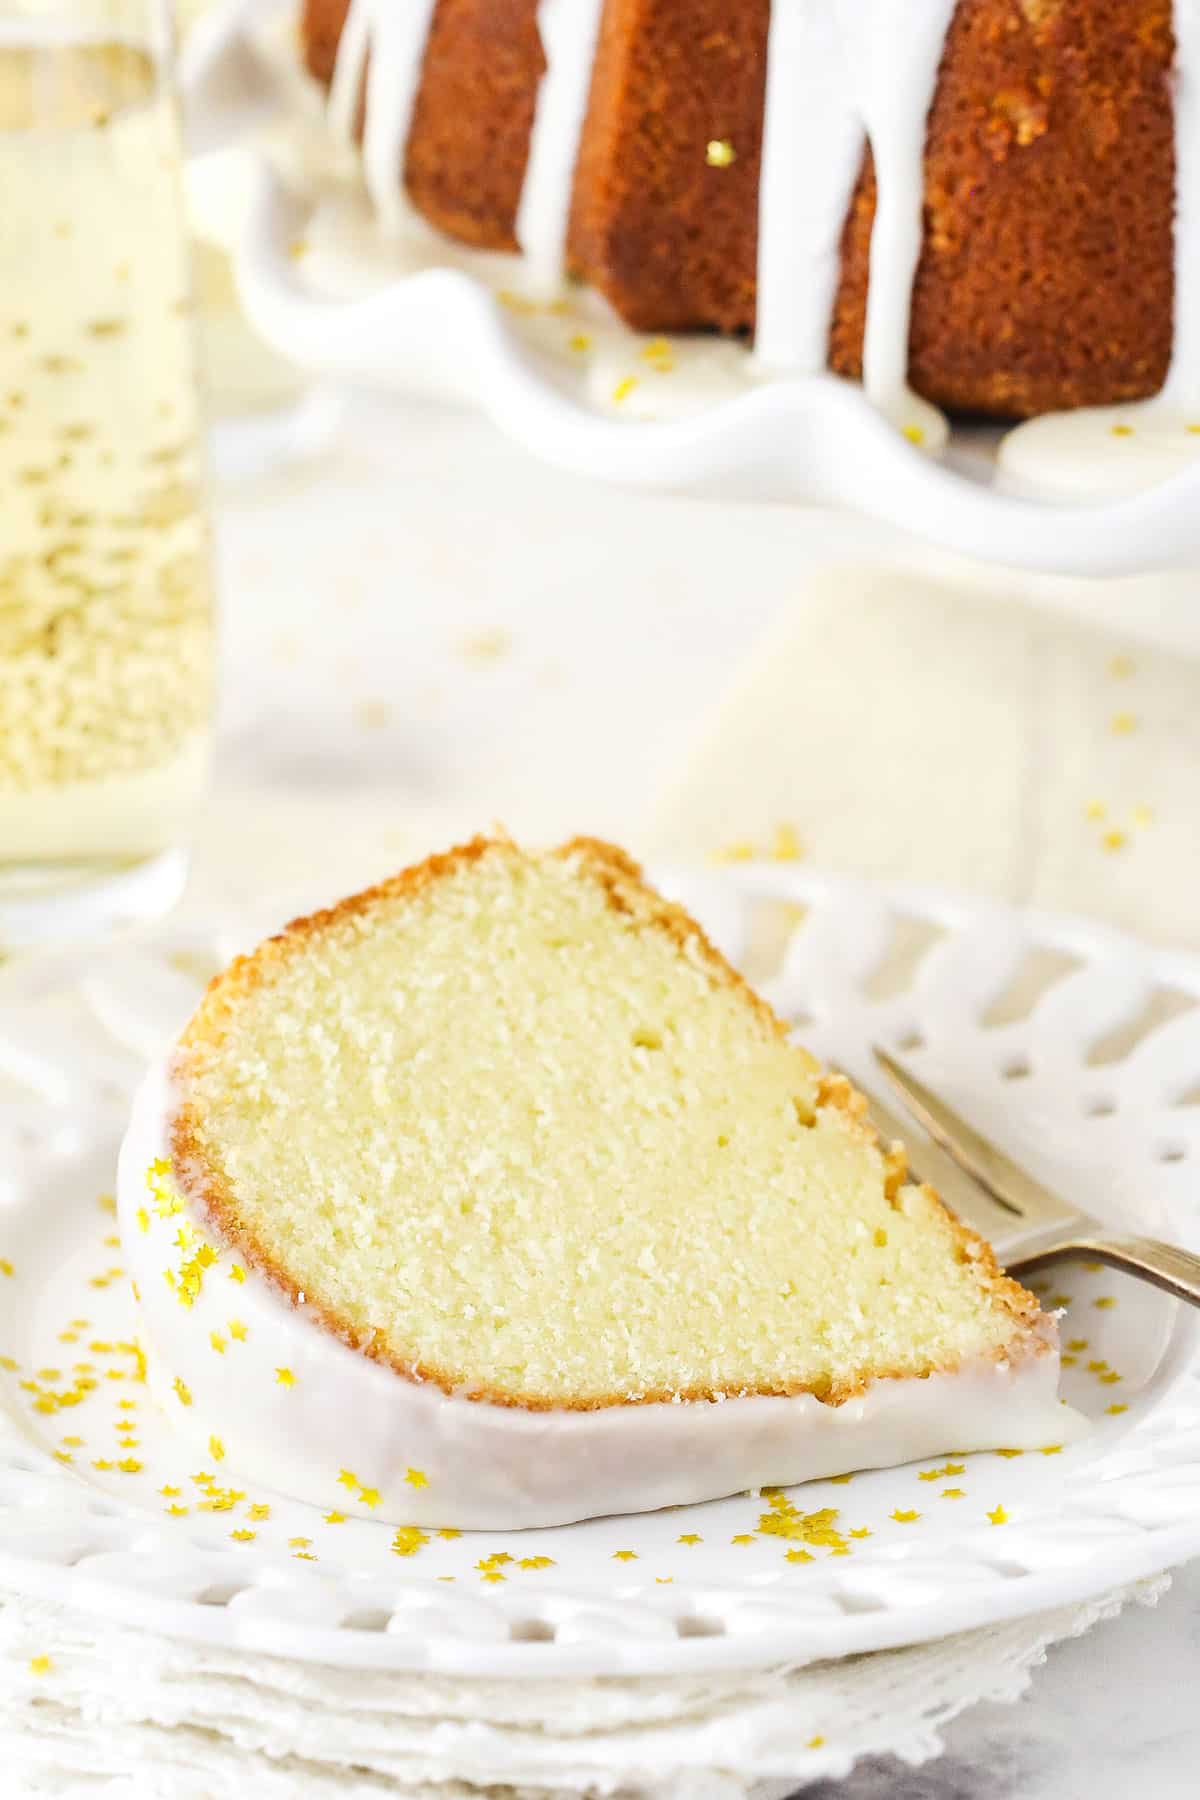 A Slice of Champagne Pound Cake with Star-Shaped Sprinkles on a Plate.